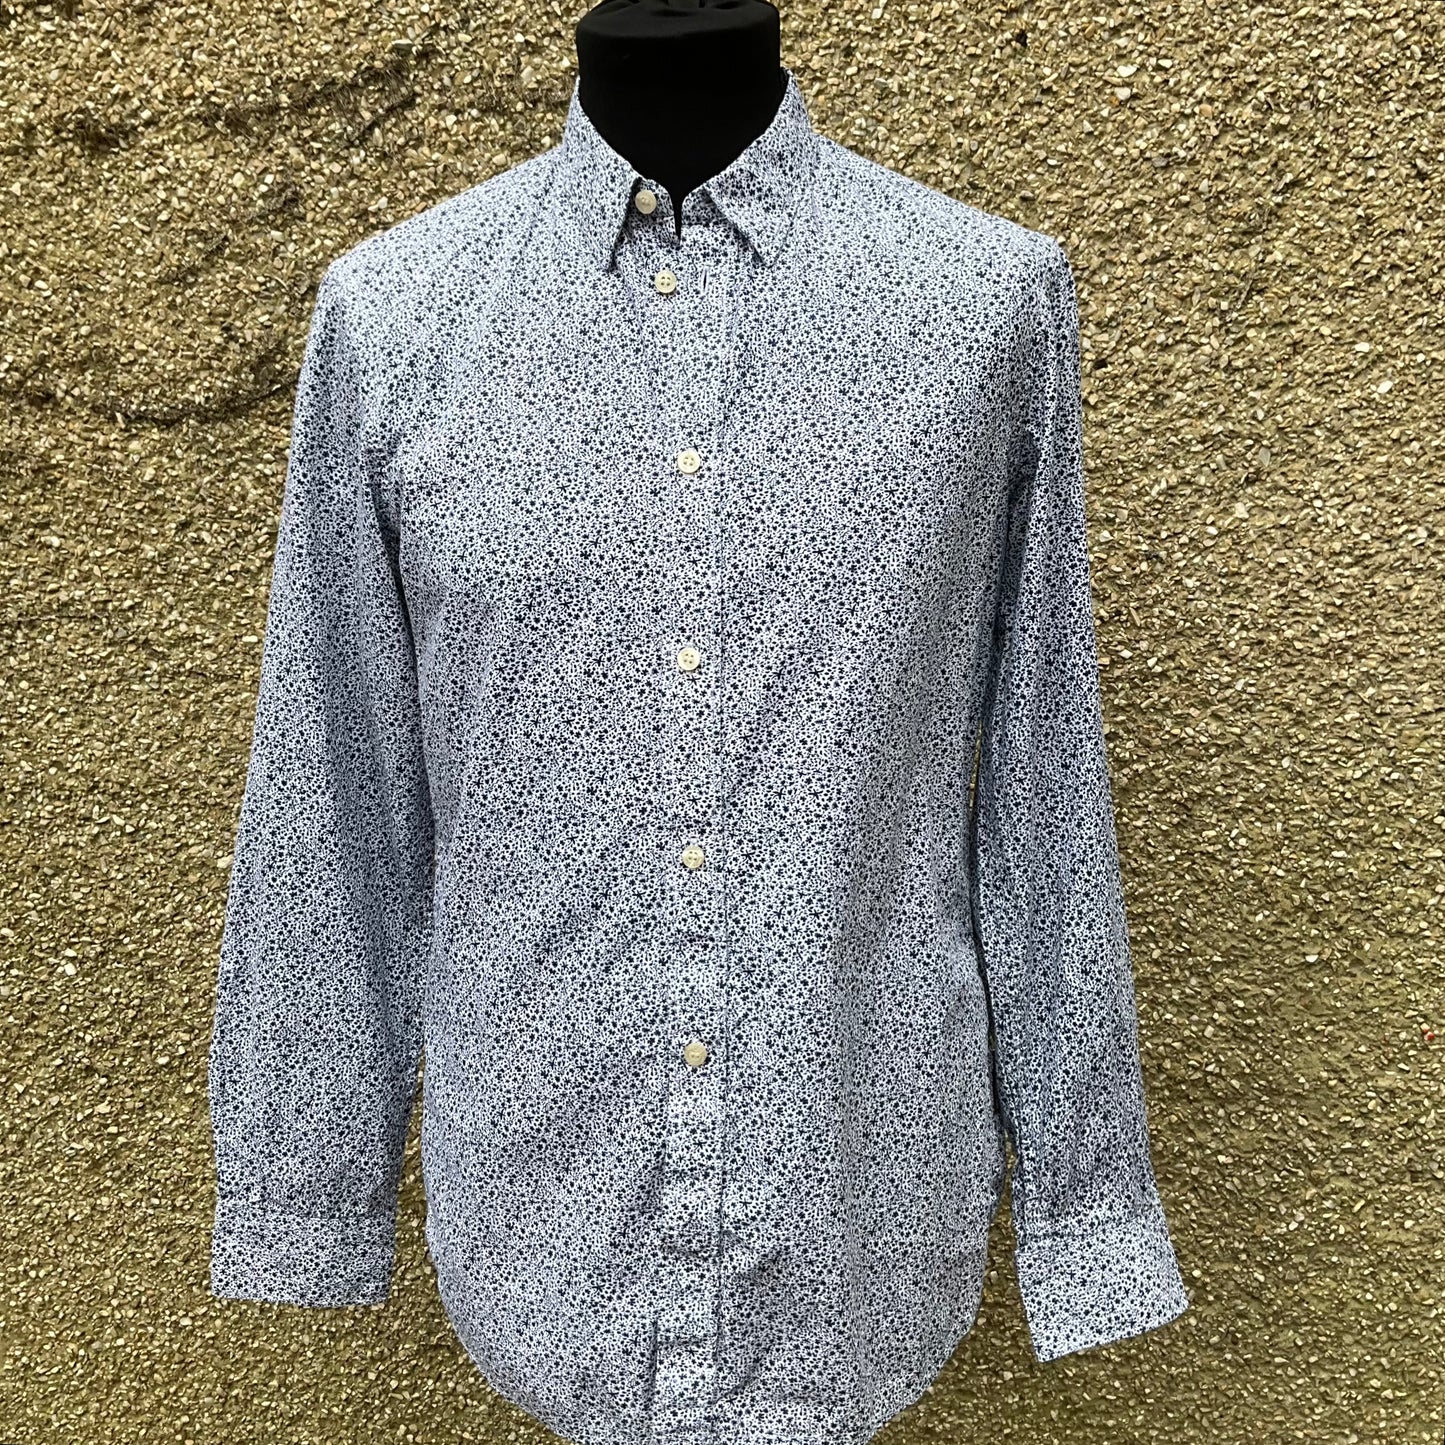 Vintage Gents FRENCH CONNECTION Blue and White floral cotton shirt, S- 36/38 chest